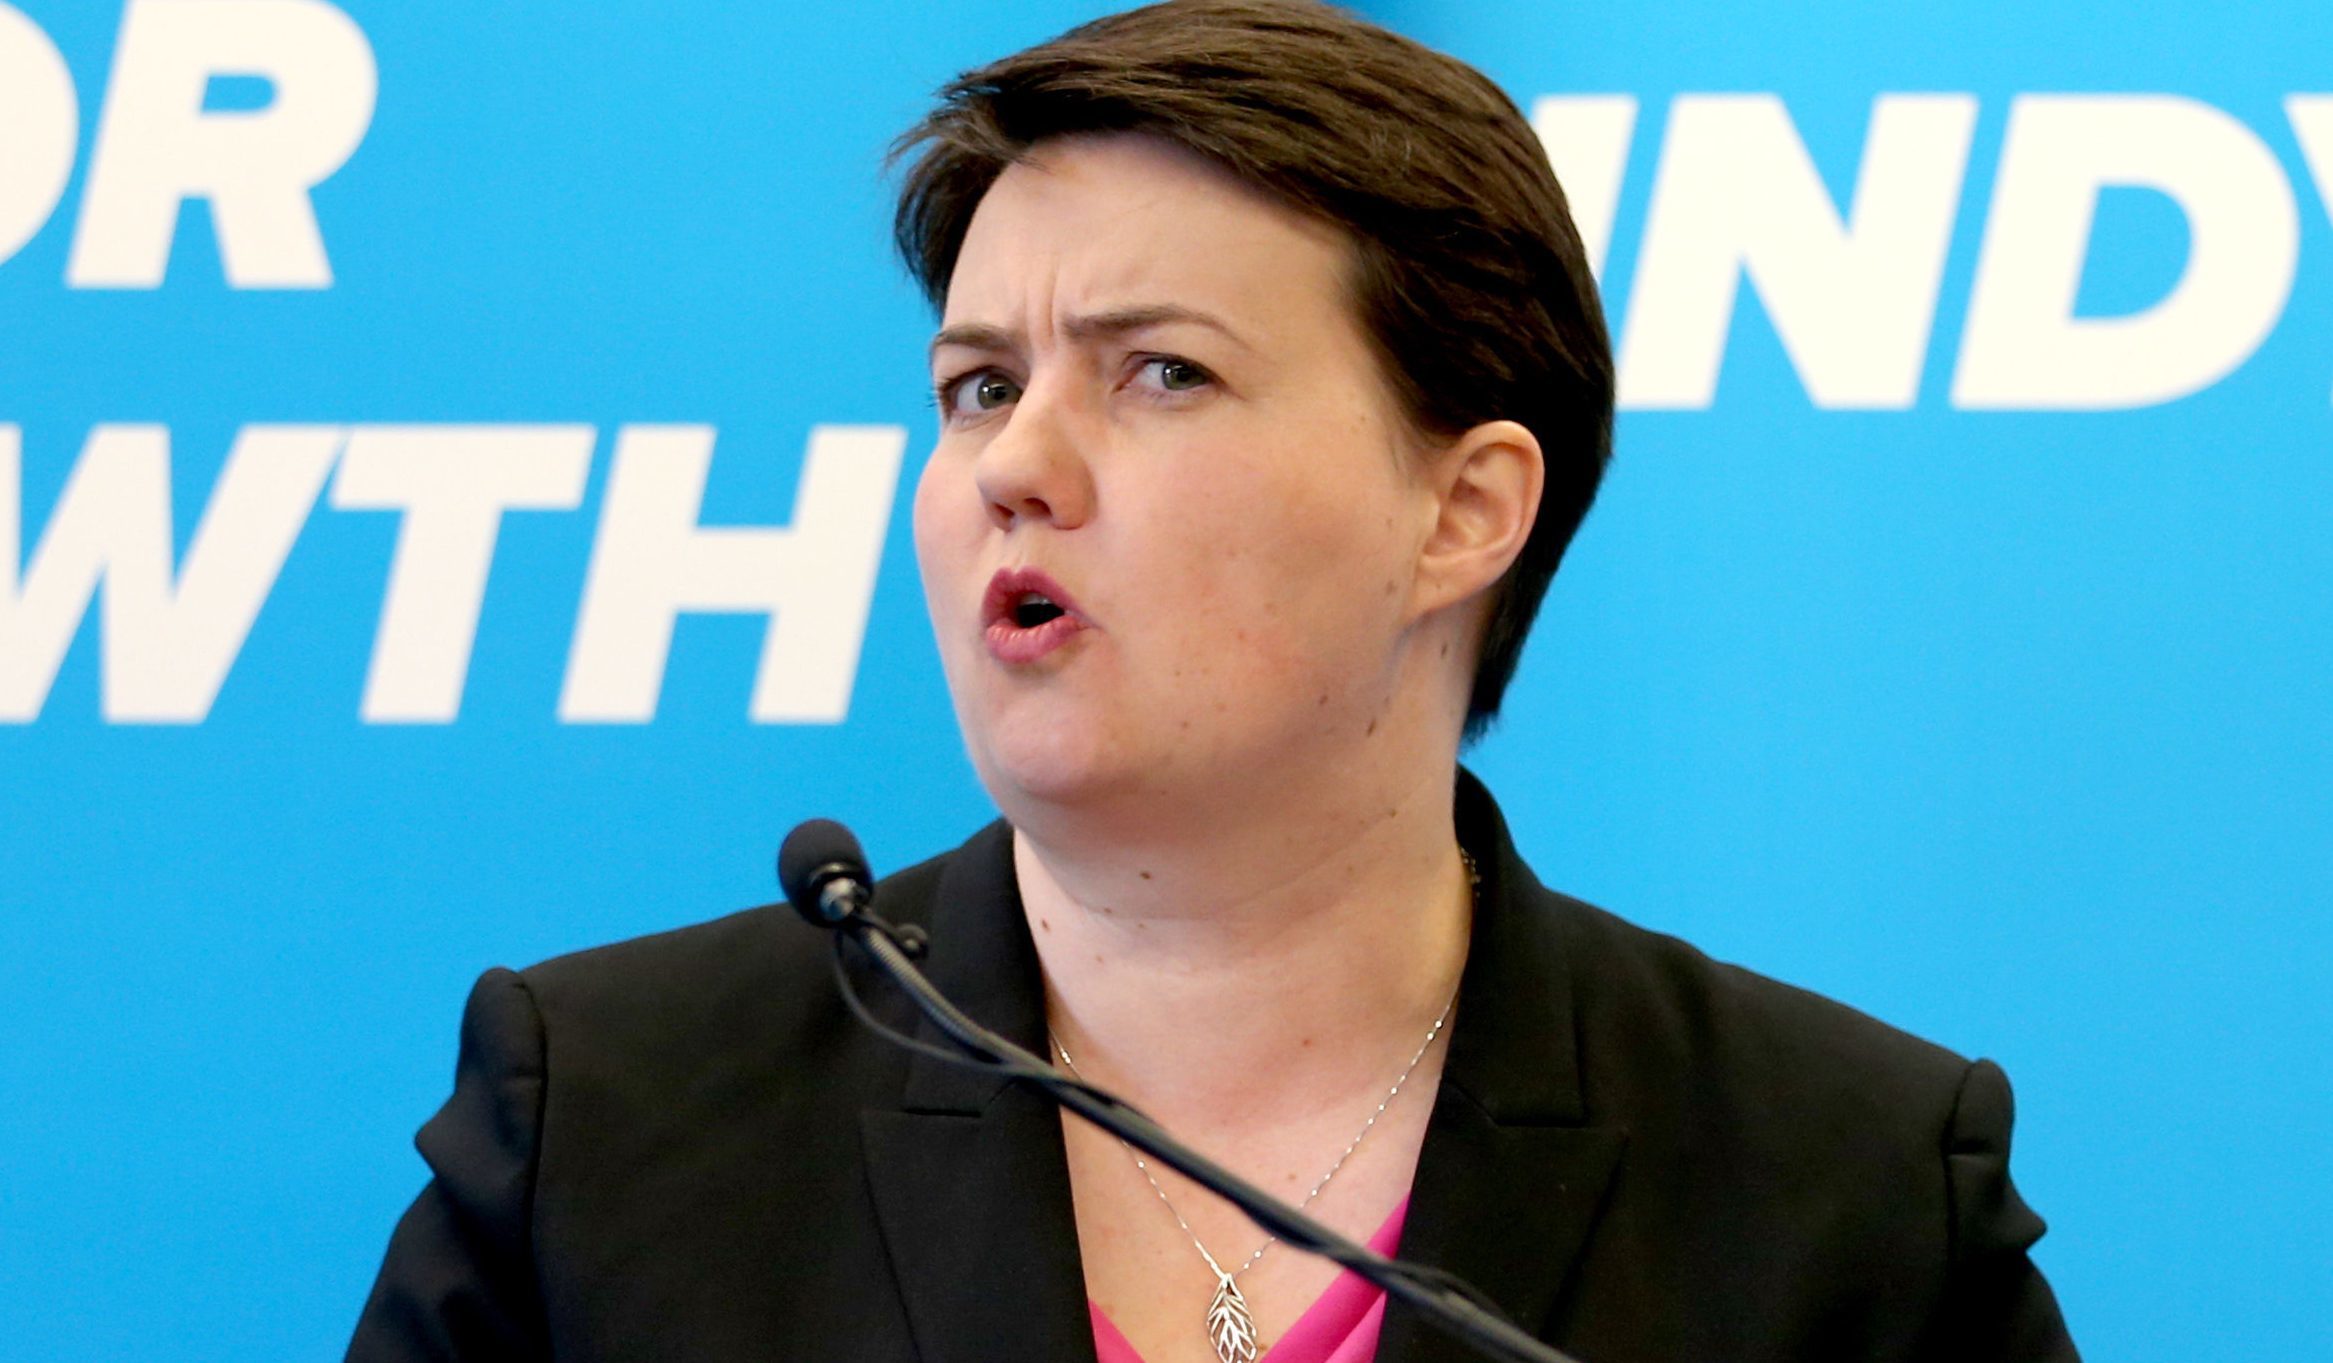 Scottish Conservative party leader Ruth Davidson (Jane Barlow/PA Wire)